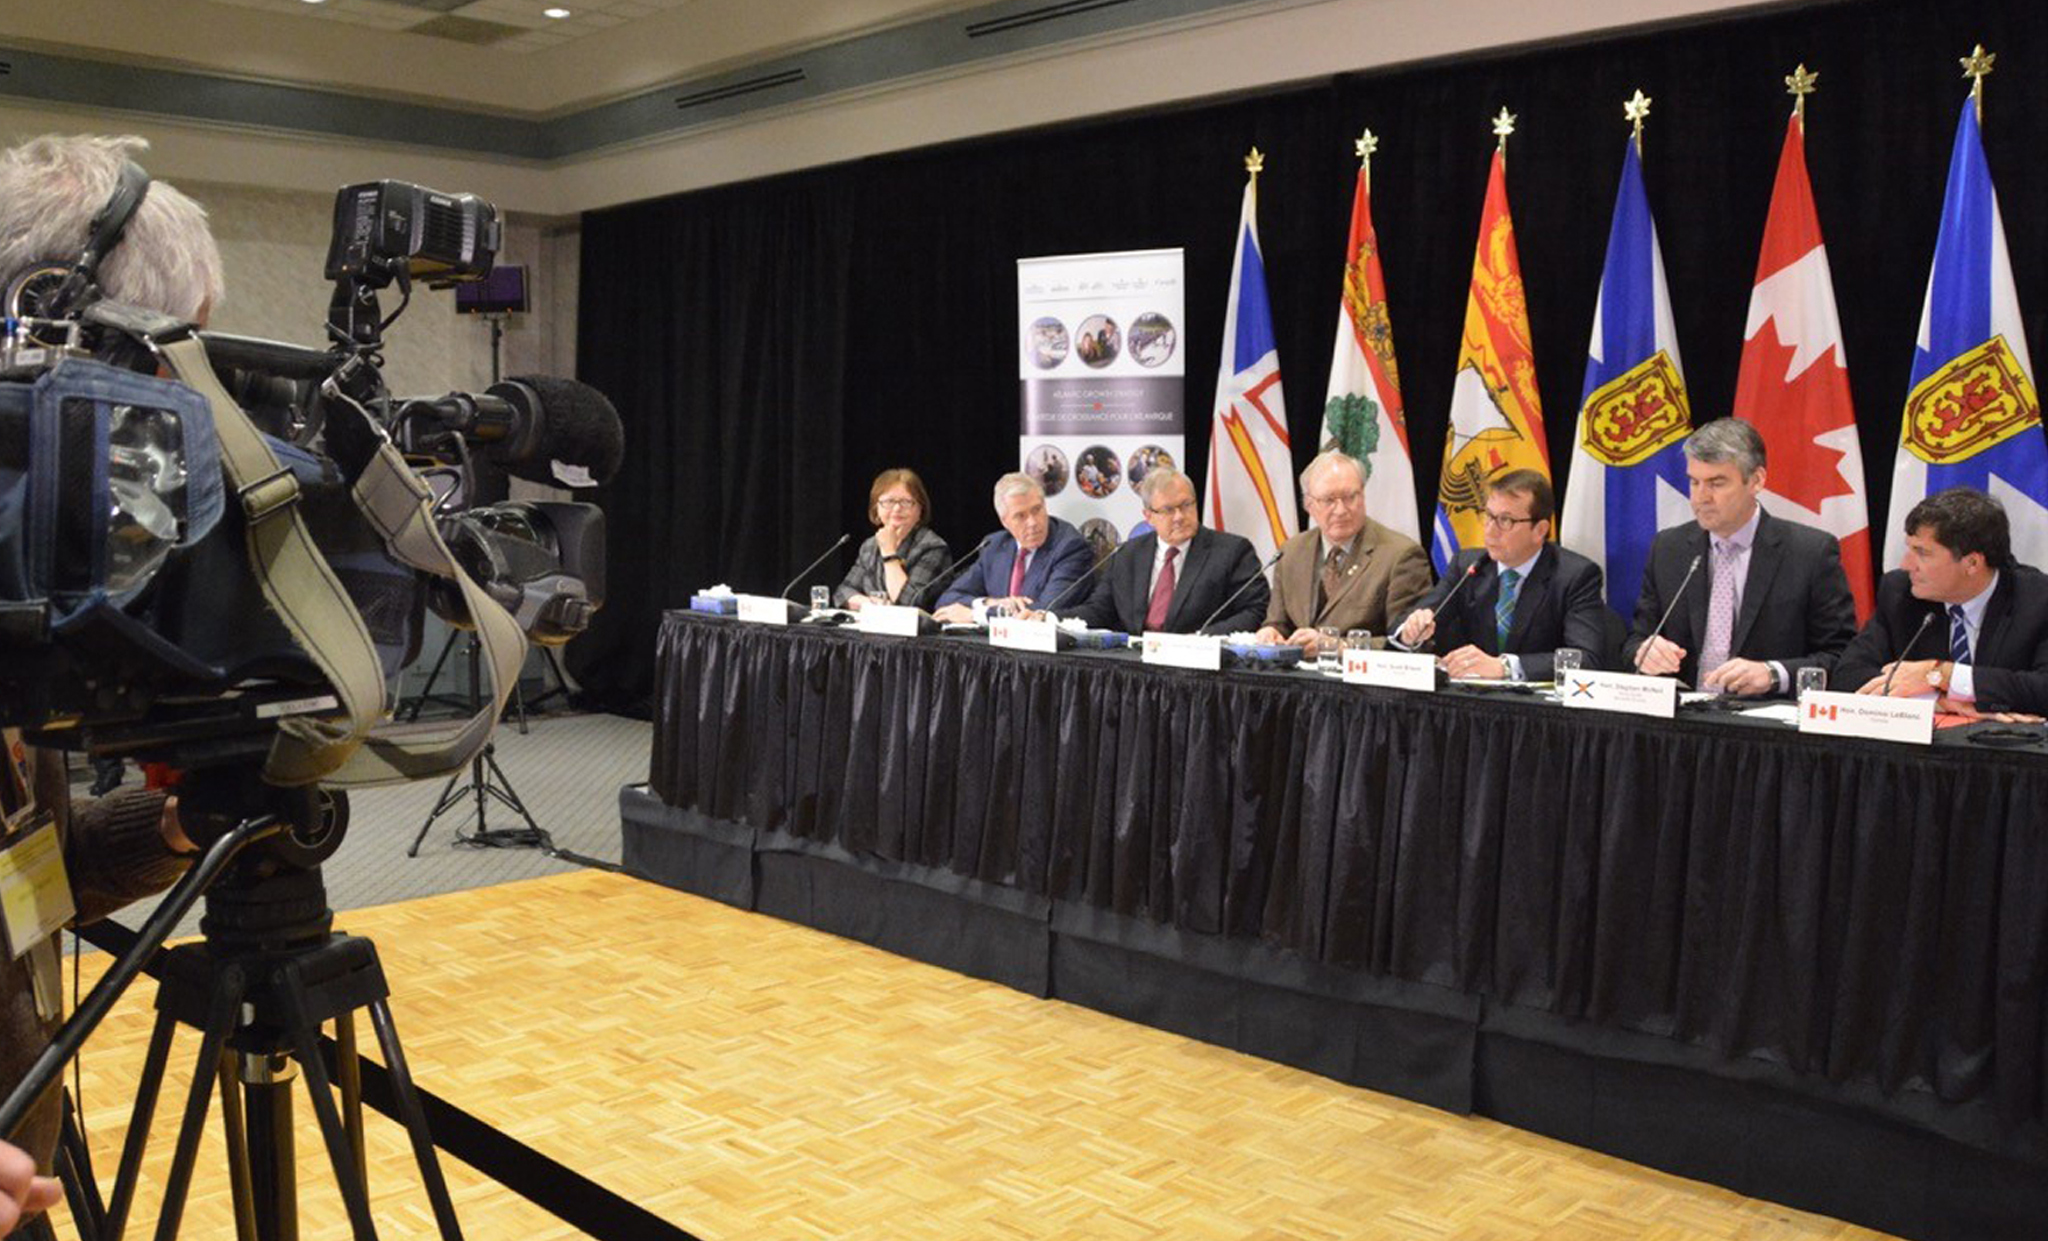 January 27, 2017 - The Honourable Judy Foote, Minister of Public Services and Procurement; the Honourable Dwight Ball, Premier of Newfoundland and Labrador; the Honourable Lawrence MacAulay, Minister of Agriculture and Agri-food; the Honourable Wade MacLauchlan, Premier of Prince Edward Island; the Honourable Stephen McNeil, Premier of Nova Scotia; the Honourable Scott Brison, President of the Treasury Board; the Honourable Dominic LeBlanc, Minister of Fisheries, Oceans and the Canadian Coast Guard; the Honourable Donald Arsenault, Minister responsible for Intergovernmental Affairs, New Brunswick; the Honourable Navdeep Bains, Minister of Innovation, Science and Economic Development and Minister responsible for the Atlantic Canada Opportunities Agency; and the Honourable Ahmed D. Hussen, Minister of Immigration, Refugees and Citizenship, were on hand in Wolfville, NS, to announce new joint Atlantic Growth Strategy initiatives.